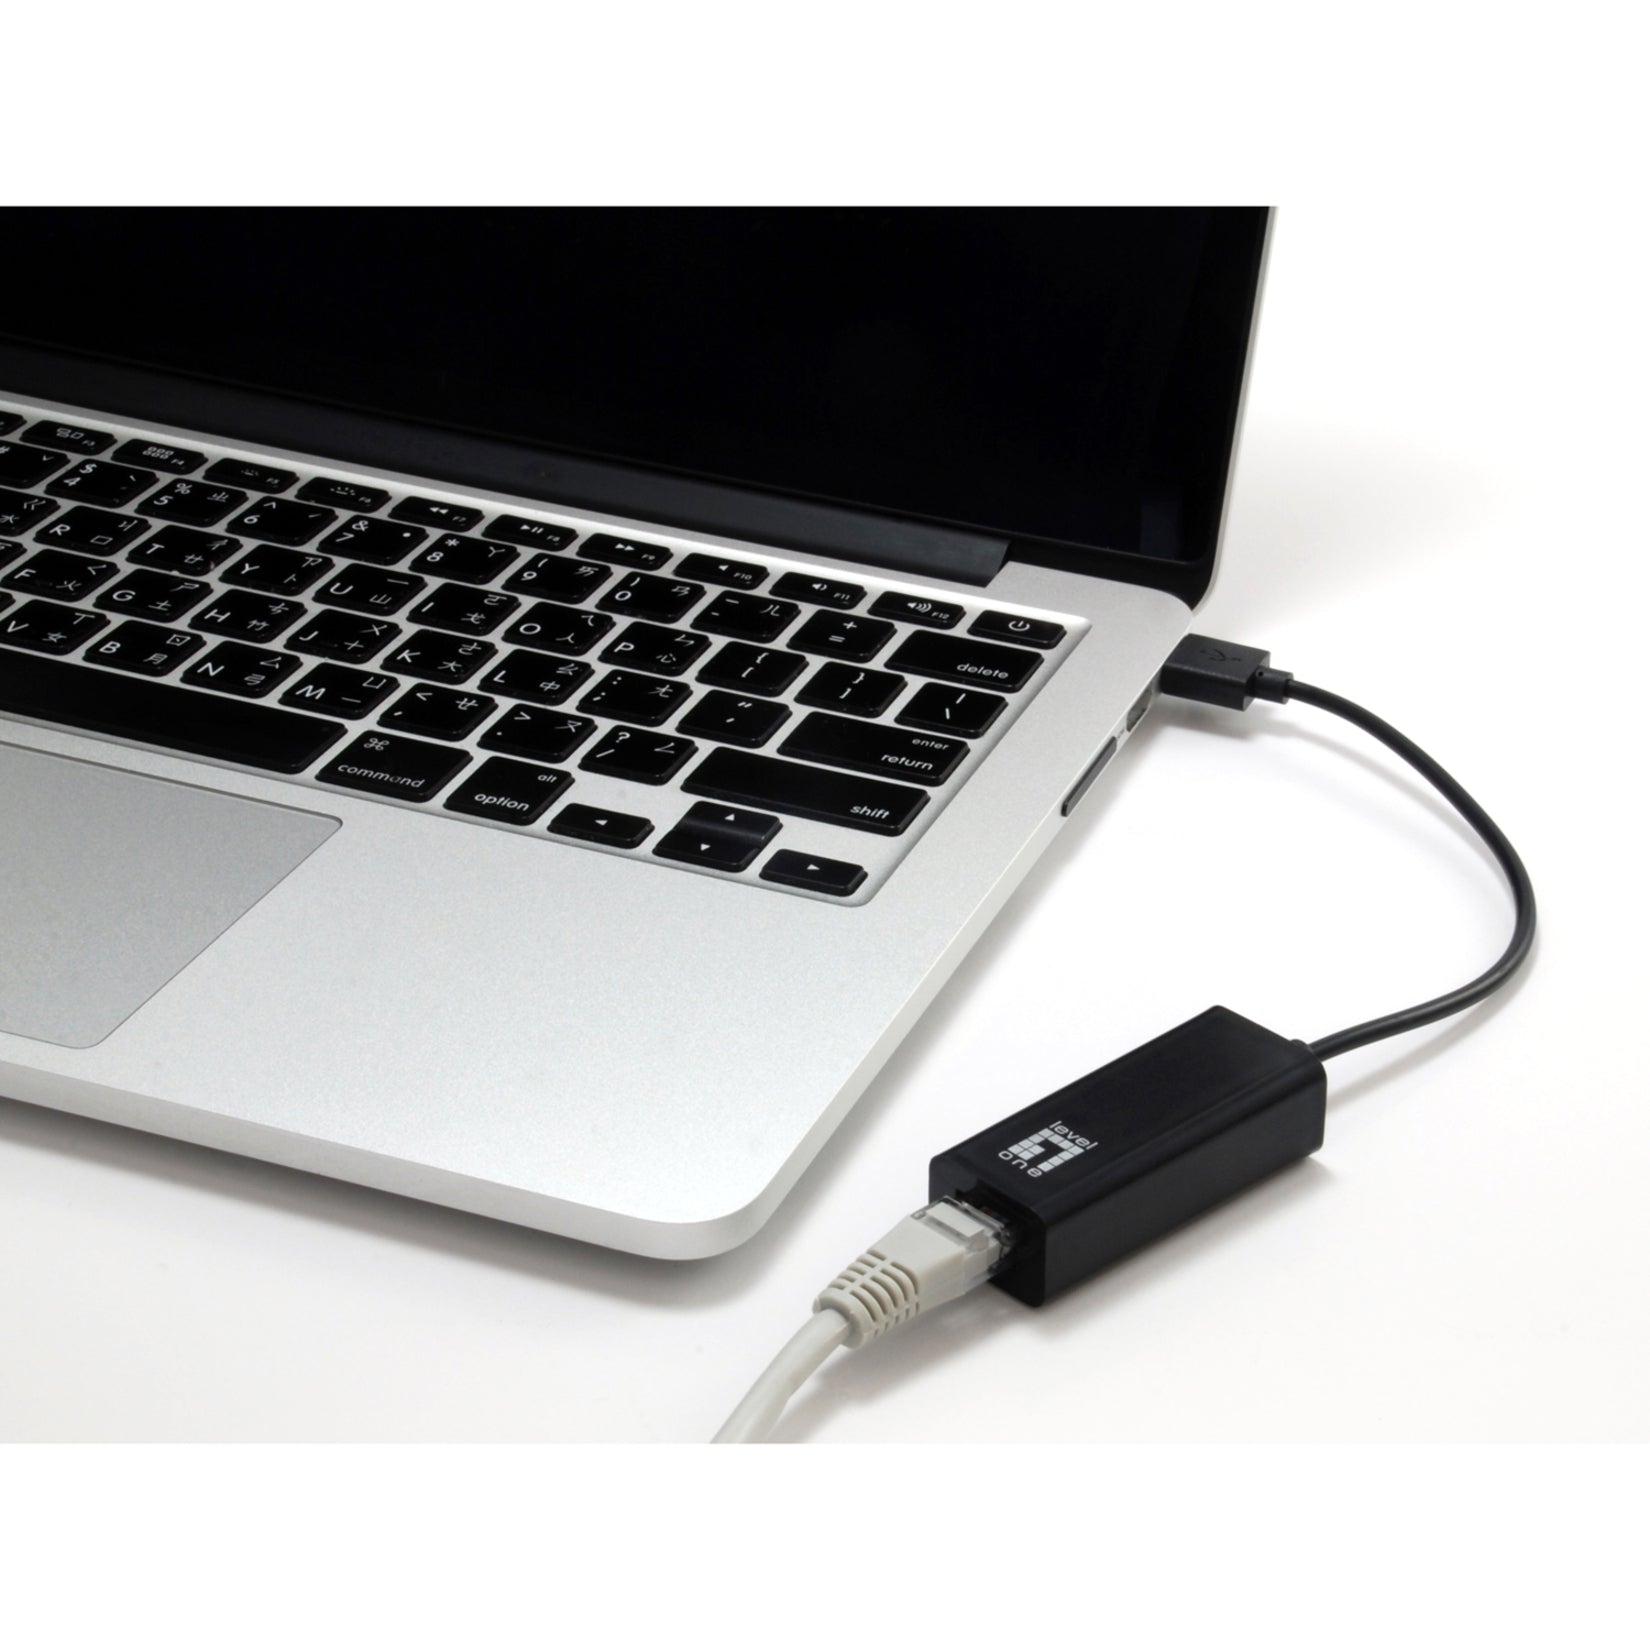 LevelOne USB-0301 USB to Ethernet Adapter for Windows and MAC, Fast and Reliable Internet Connection